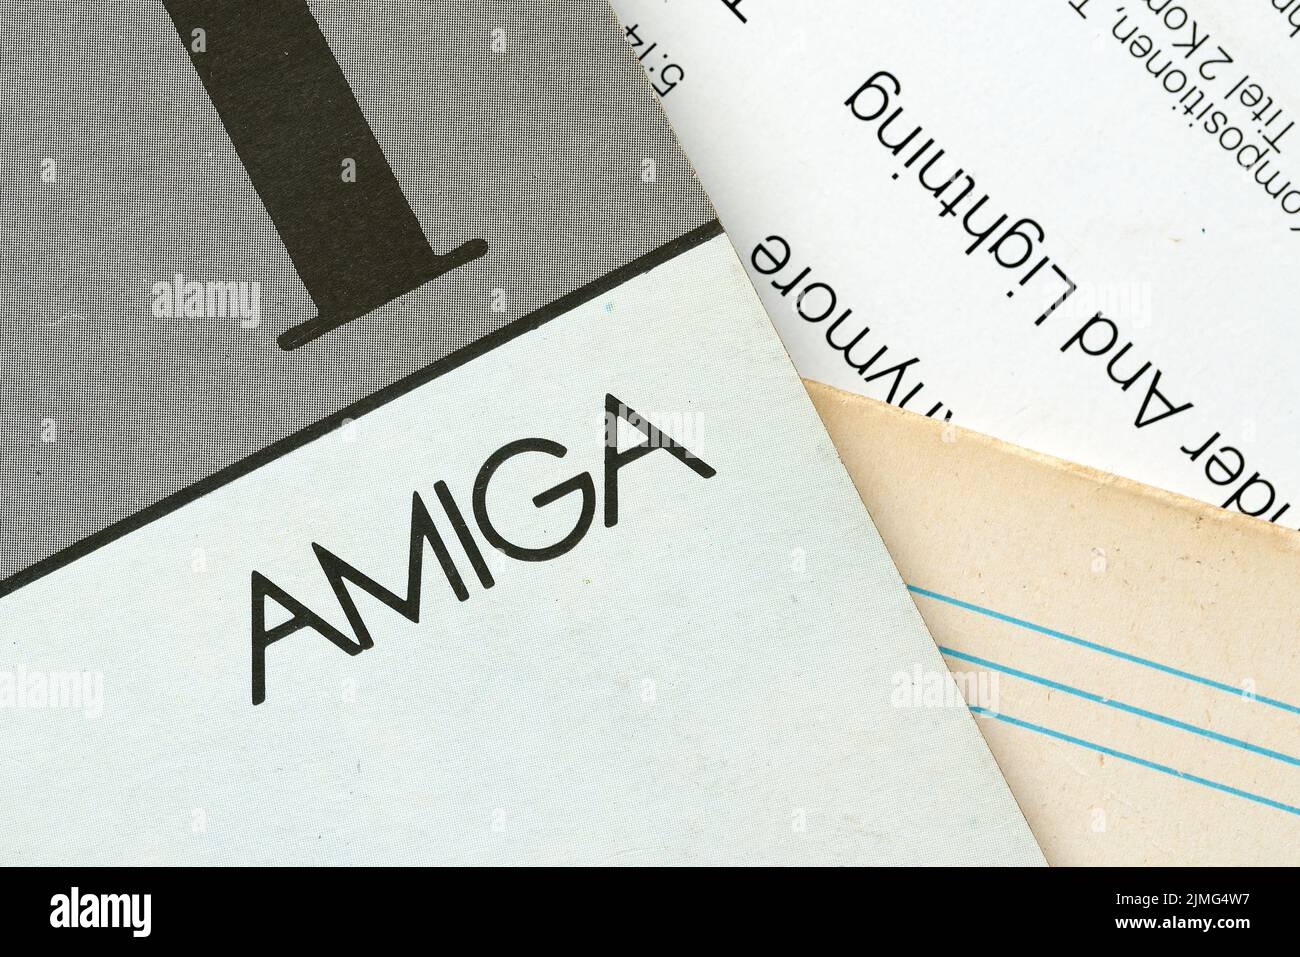 Records of the former GDR record label Amiga, which today belongs to Sony Music Stock Photo